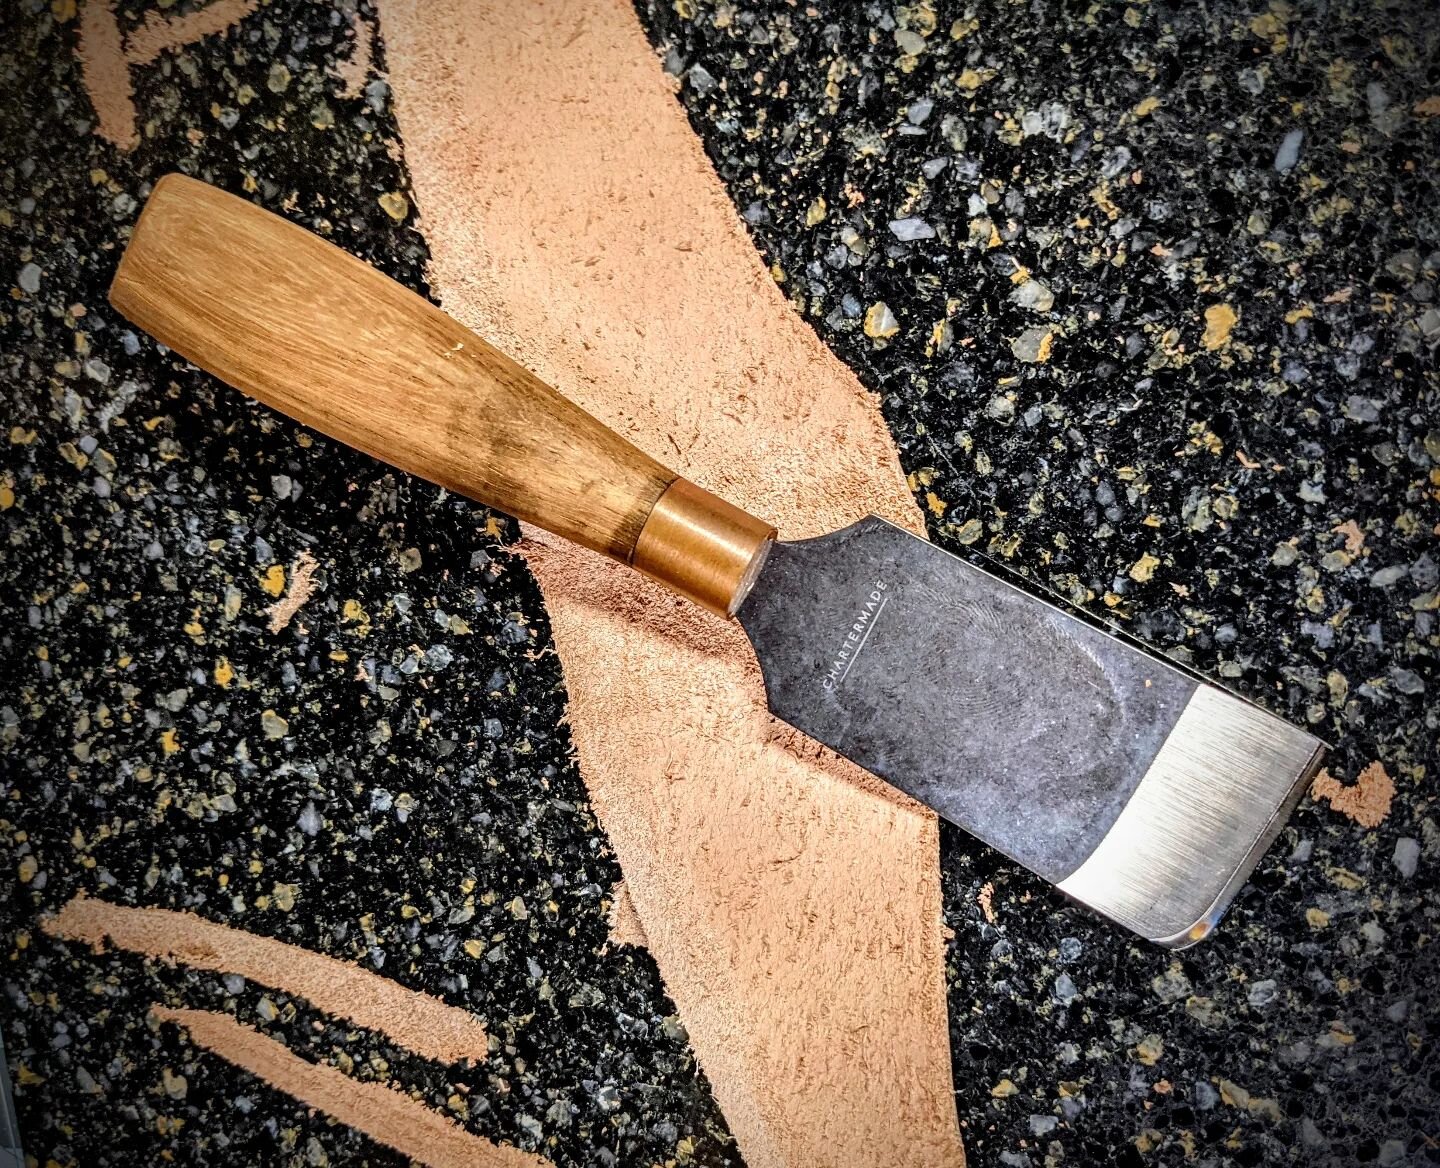 This skiving knife by @chartermade_leather_studio is simply the best hands down. Terrick is an artisan in every sense of the word and this handcrafted instrument is a testament to his experience, skill, and craftsmanship.

Buy one. It's the last one 